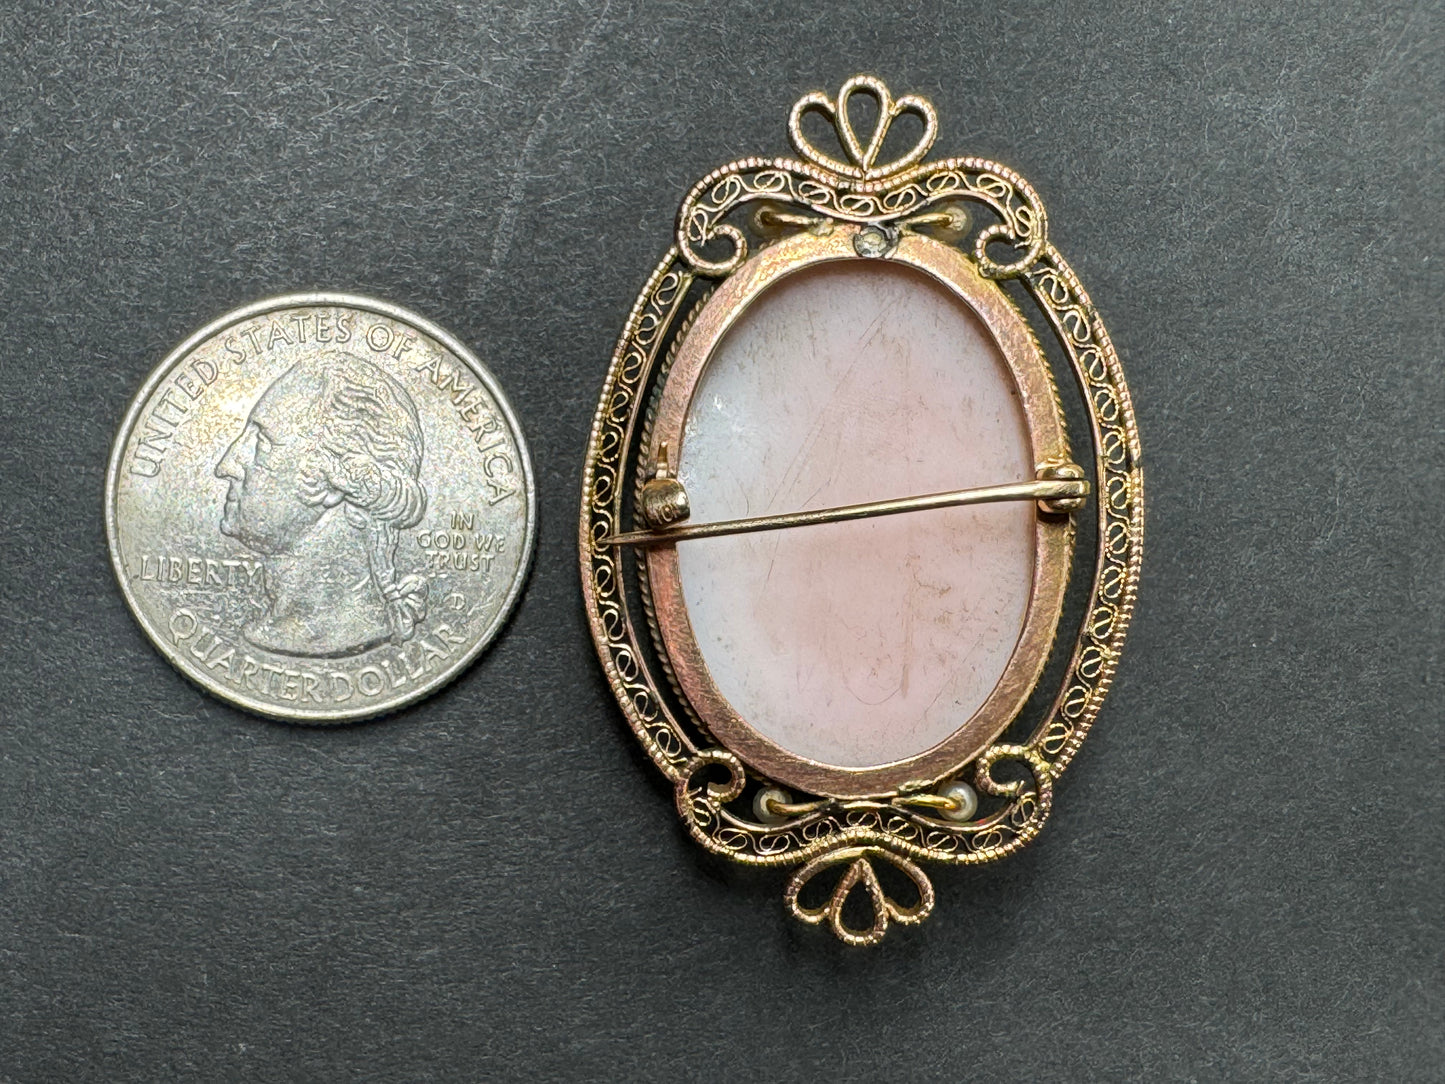 10k Filigree Framed Cameo with Pearl Details